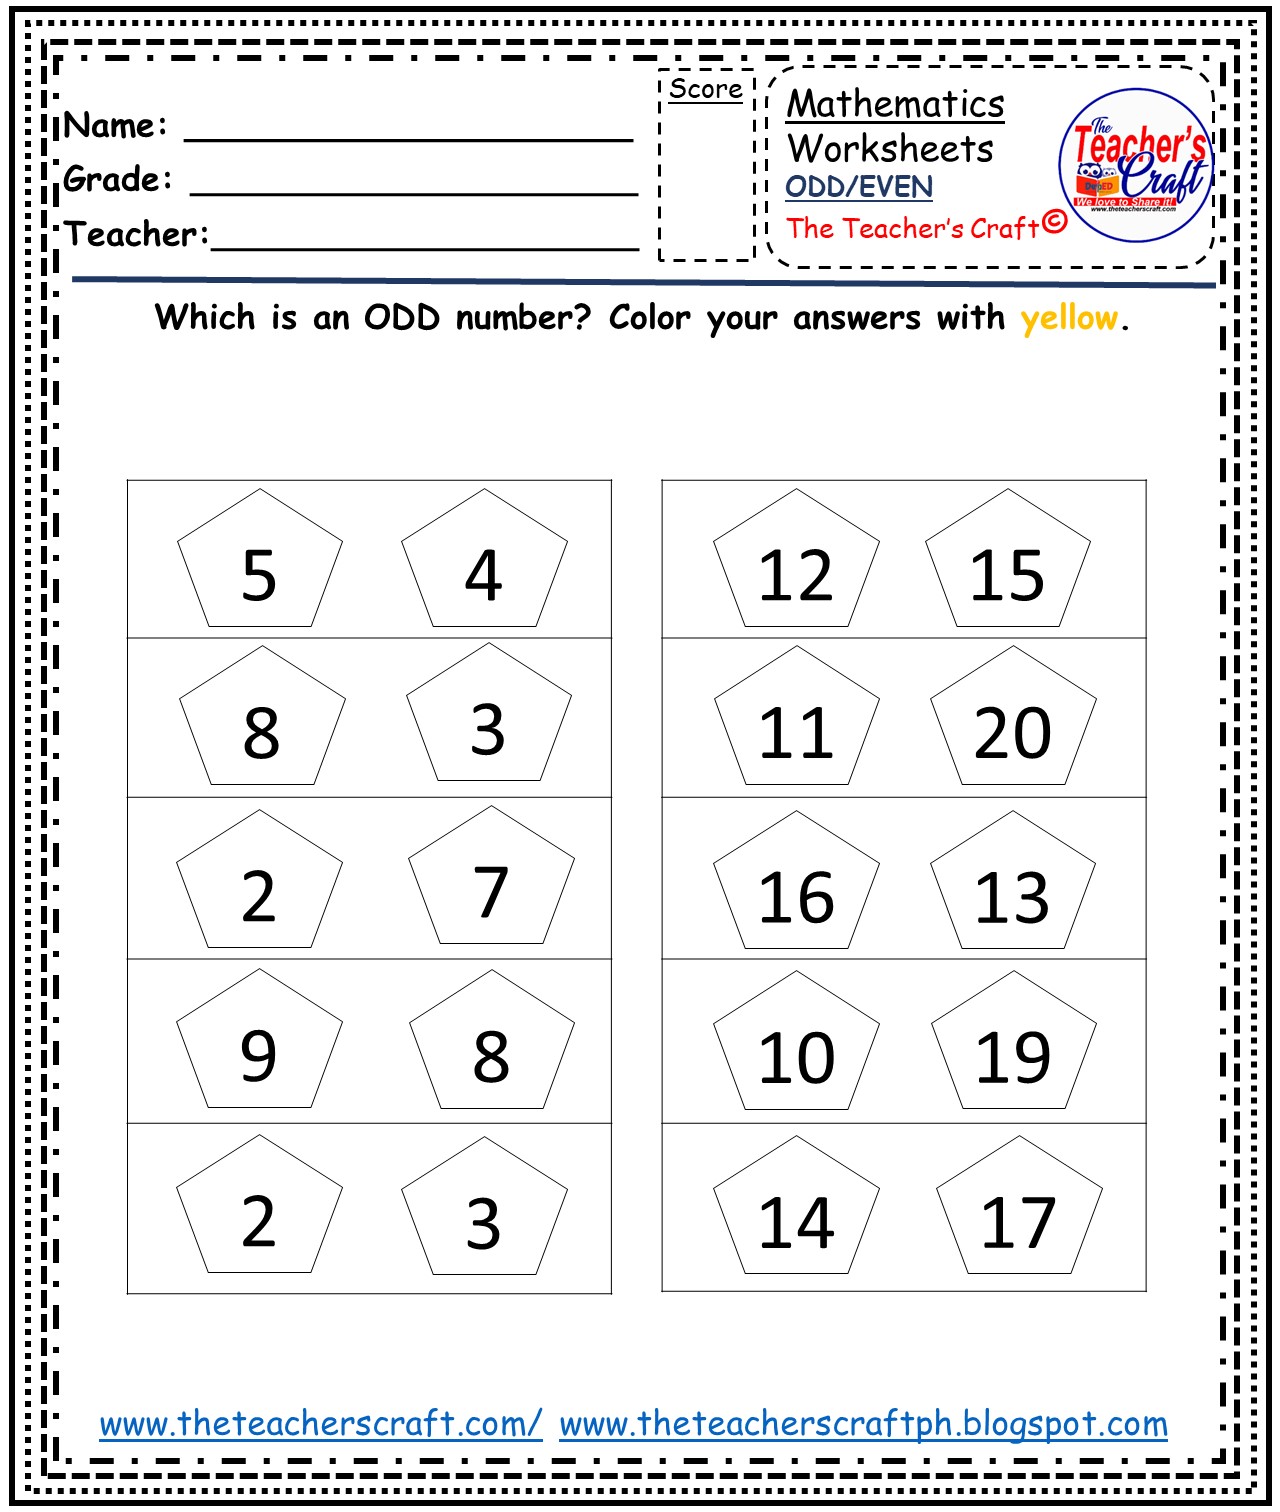 2nd Grade Odd And Even Numbers Worksheets Kidsworksheetfun Even And Odd Number Worksheets Free 